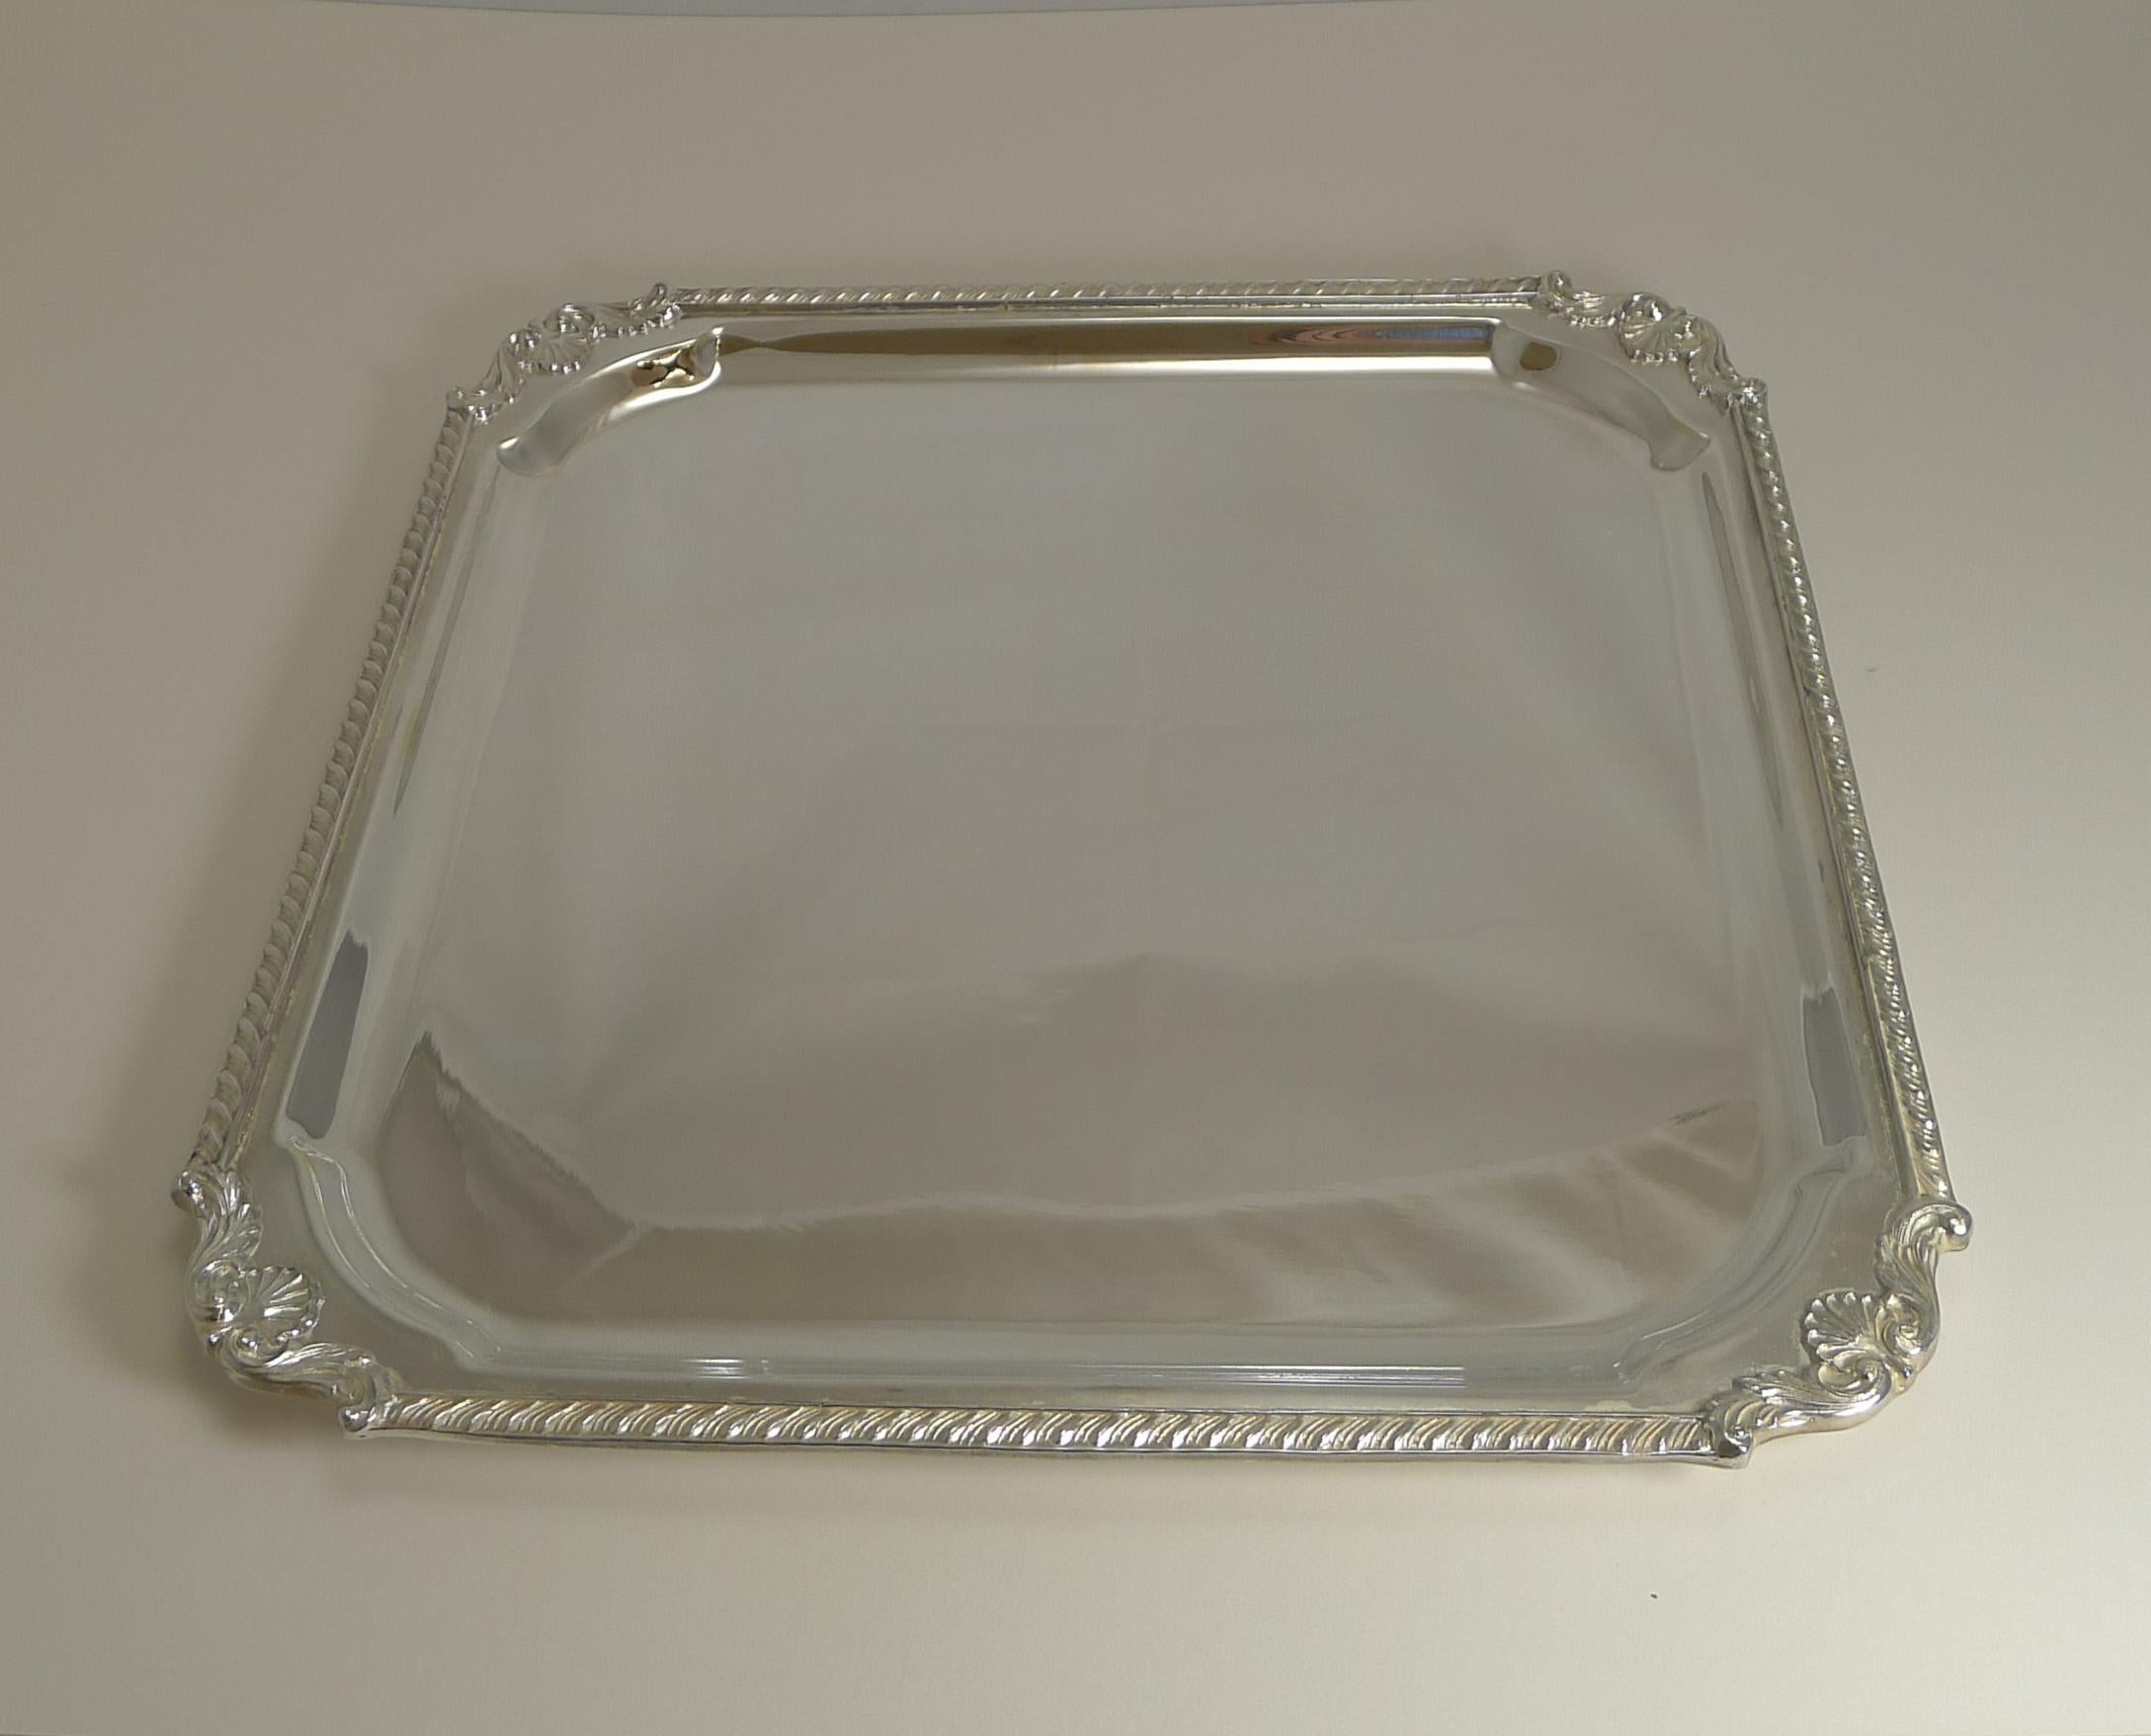 Large Antique English Silver Plated Cocktail Tray / Salver by Mappin & Webb 1